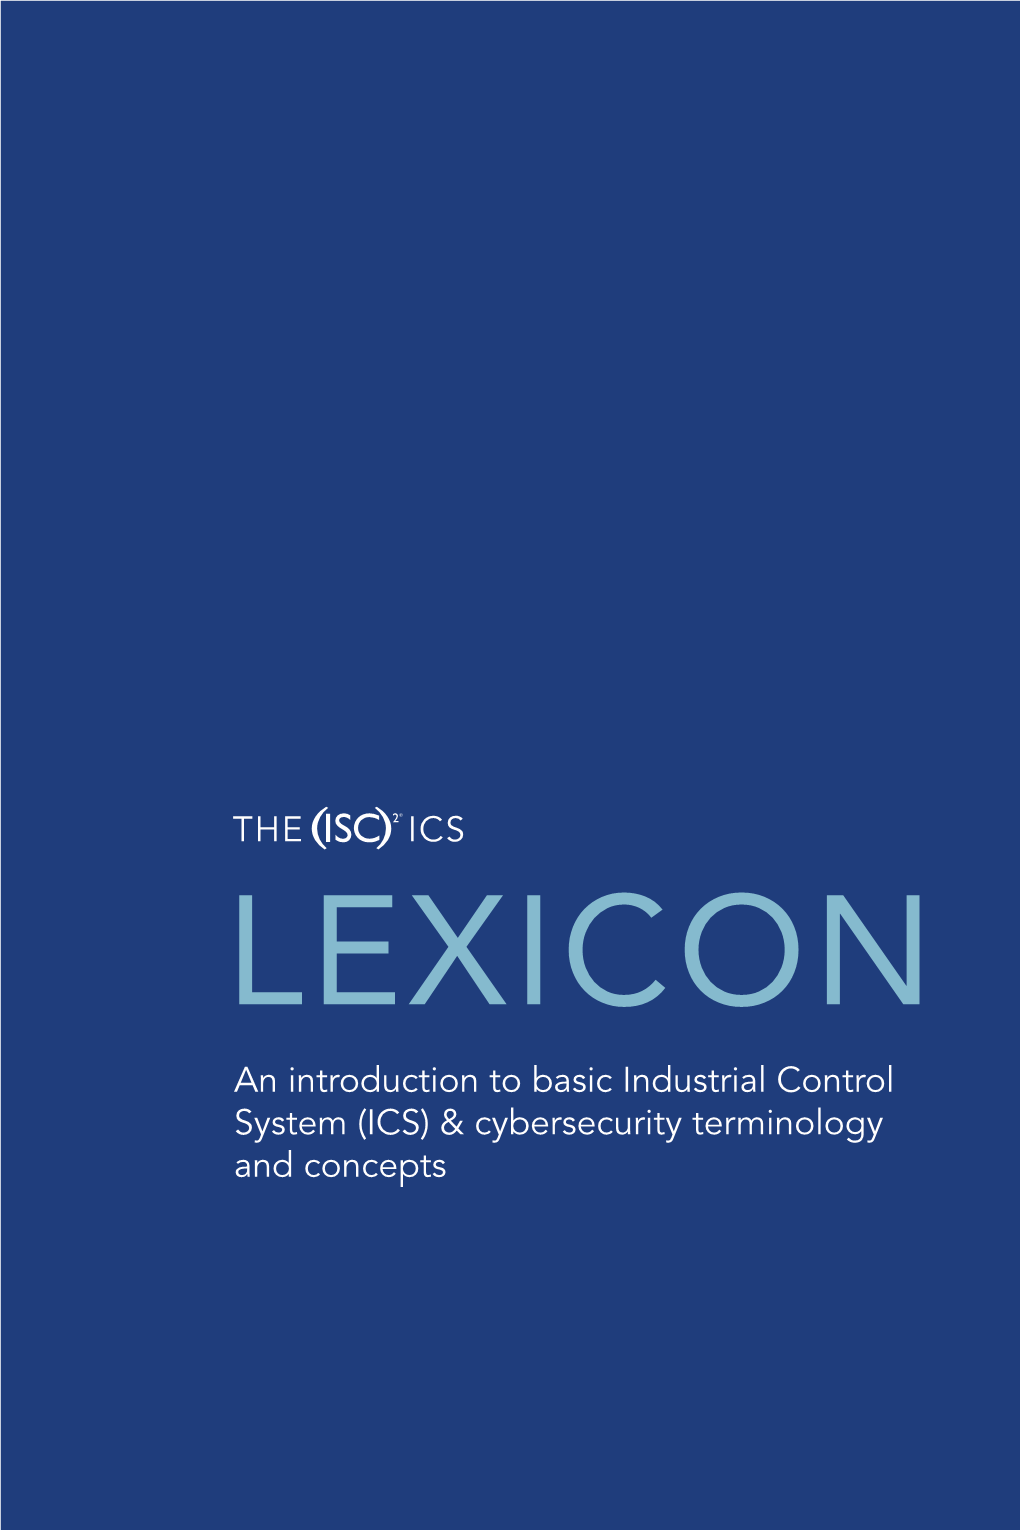 LEXICON an Introduction to Basic Industrial Control System (ICS) & Cybersecurity Terminology and Concepts